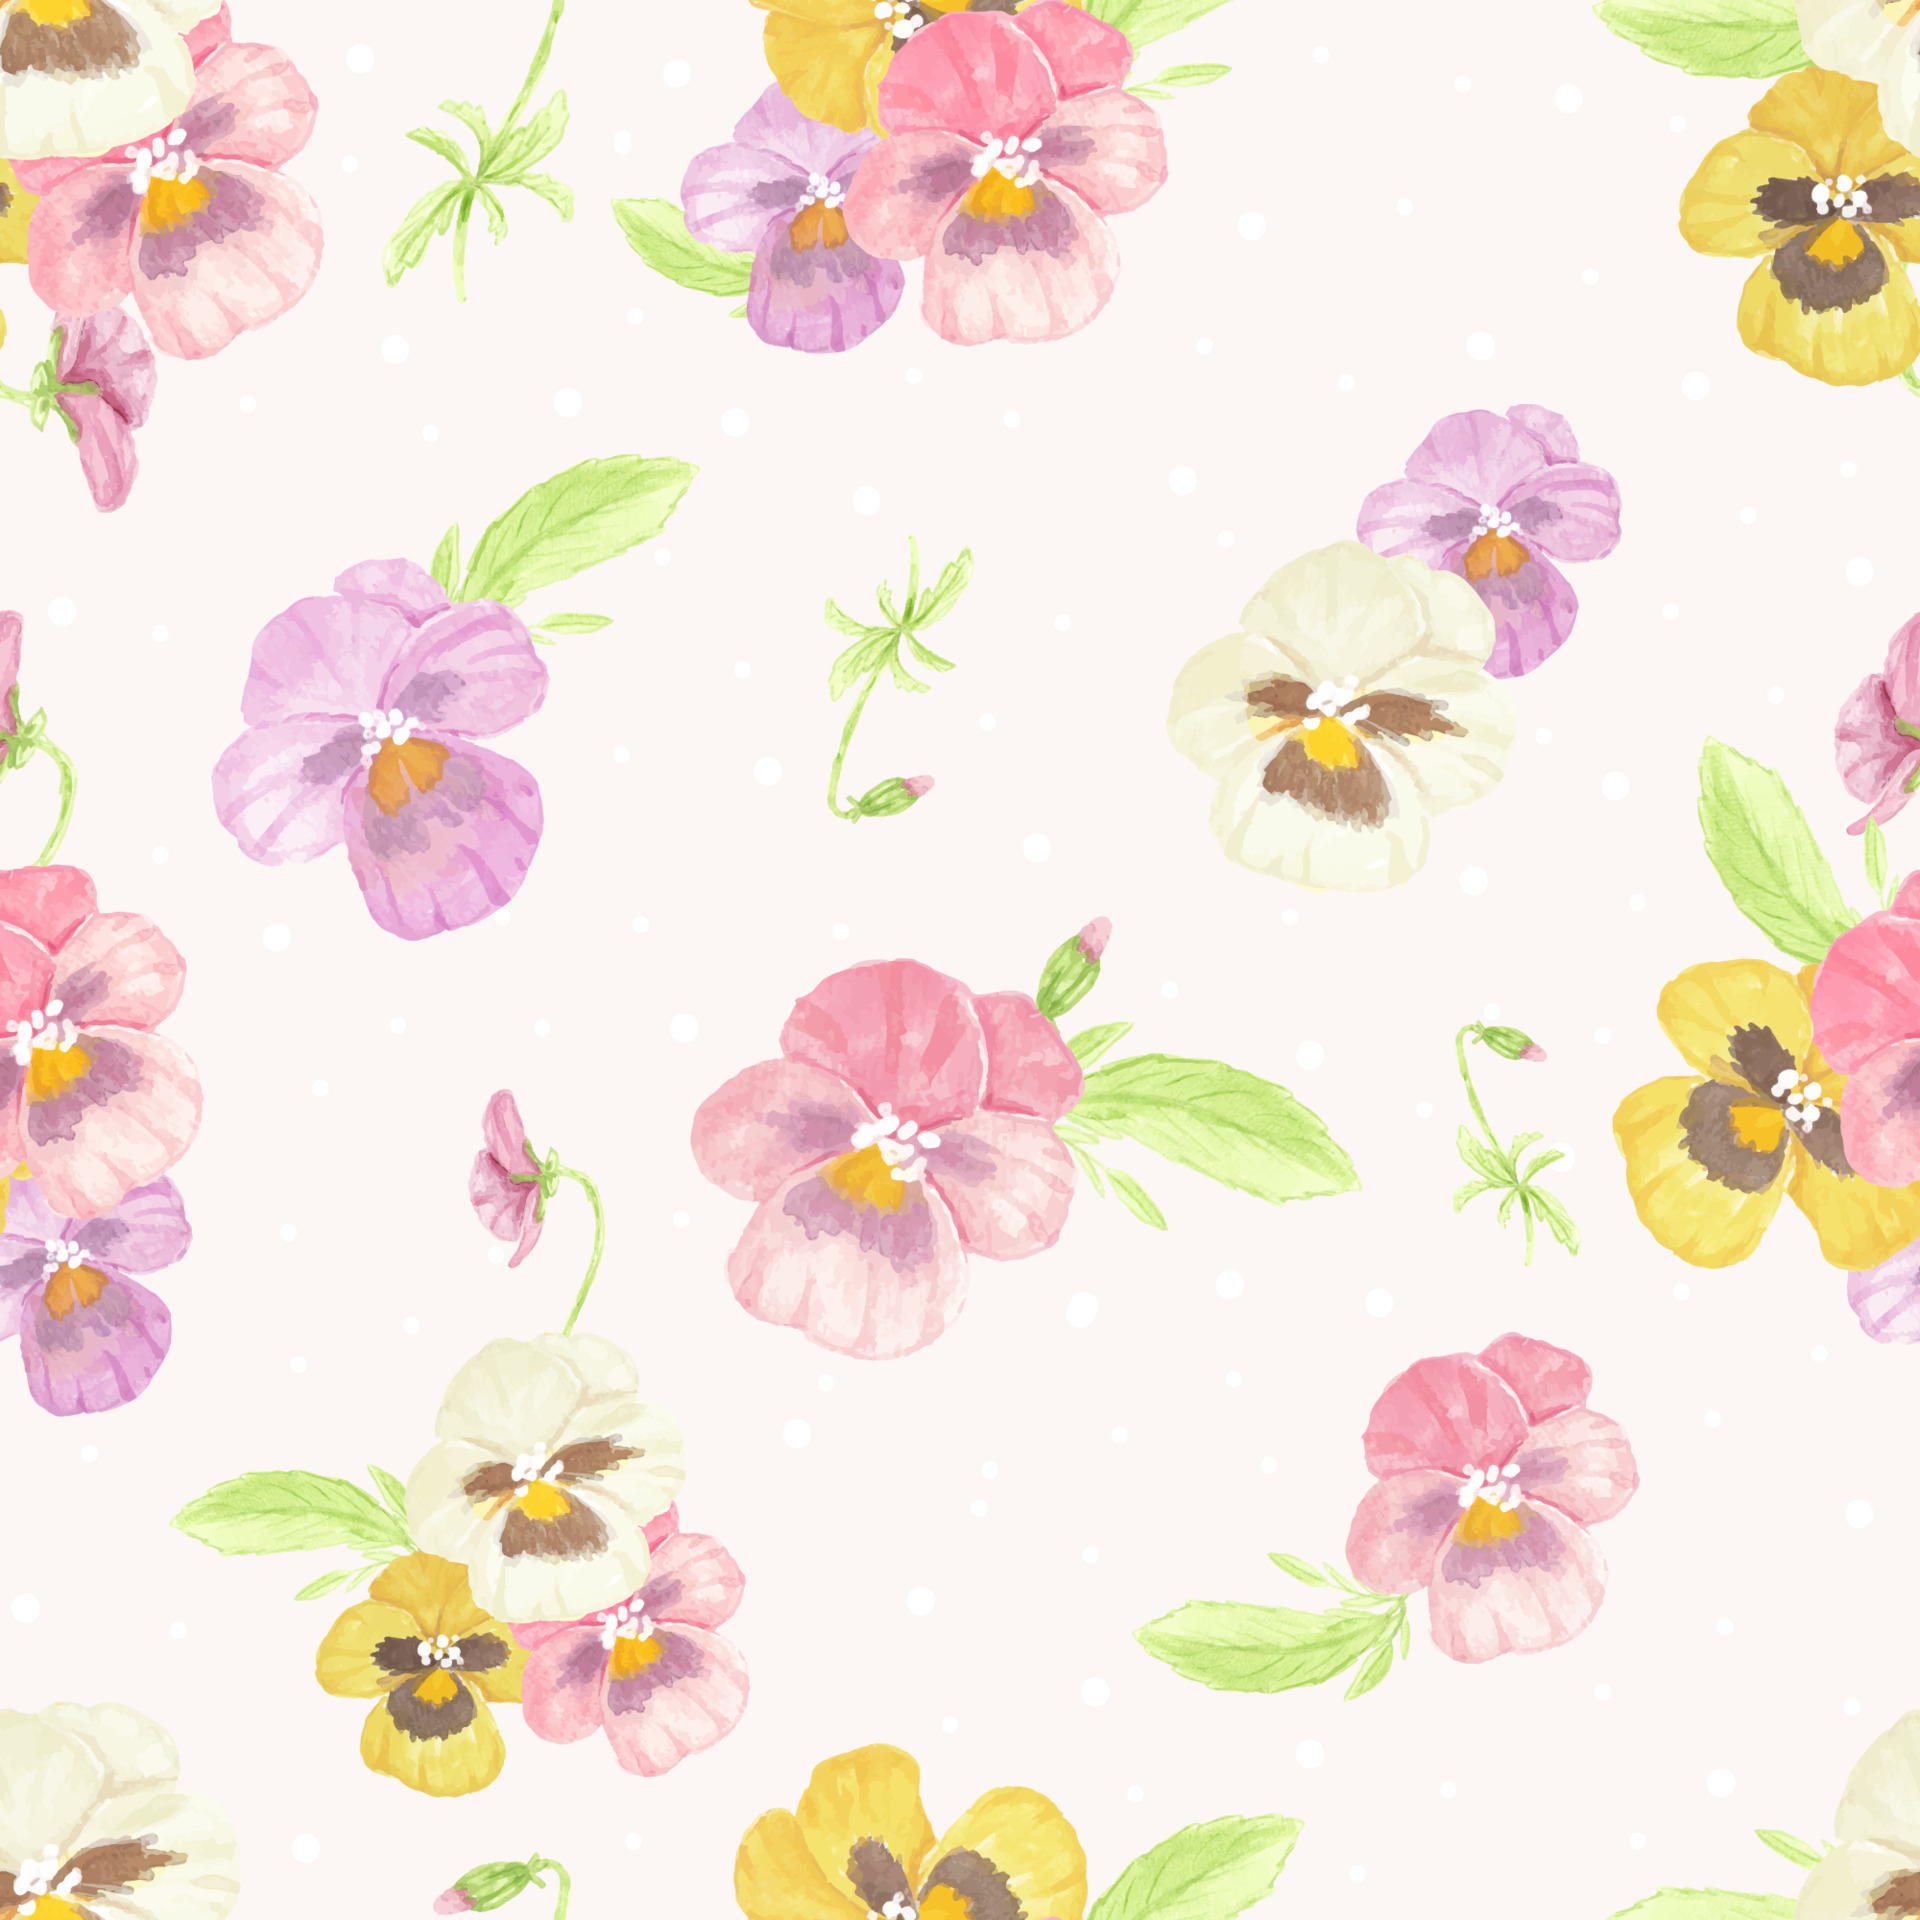 1920x1920 watercolor pansy flower seamless pattern on dot background 5679447 Vector Art